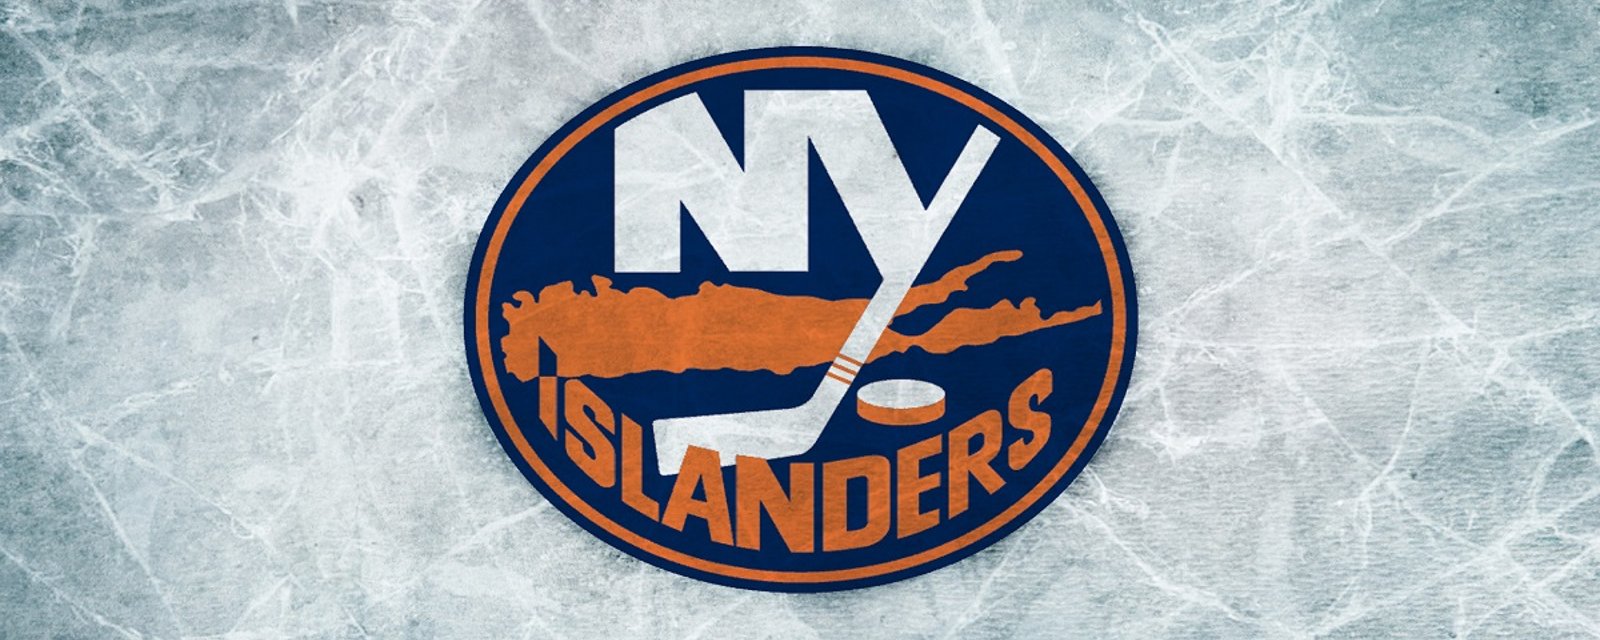 The Islanders seem to have turned things around.